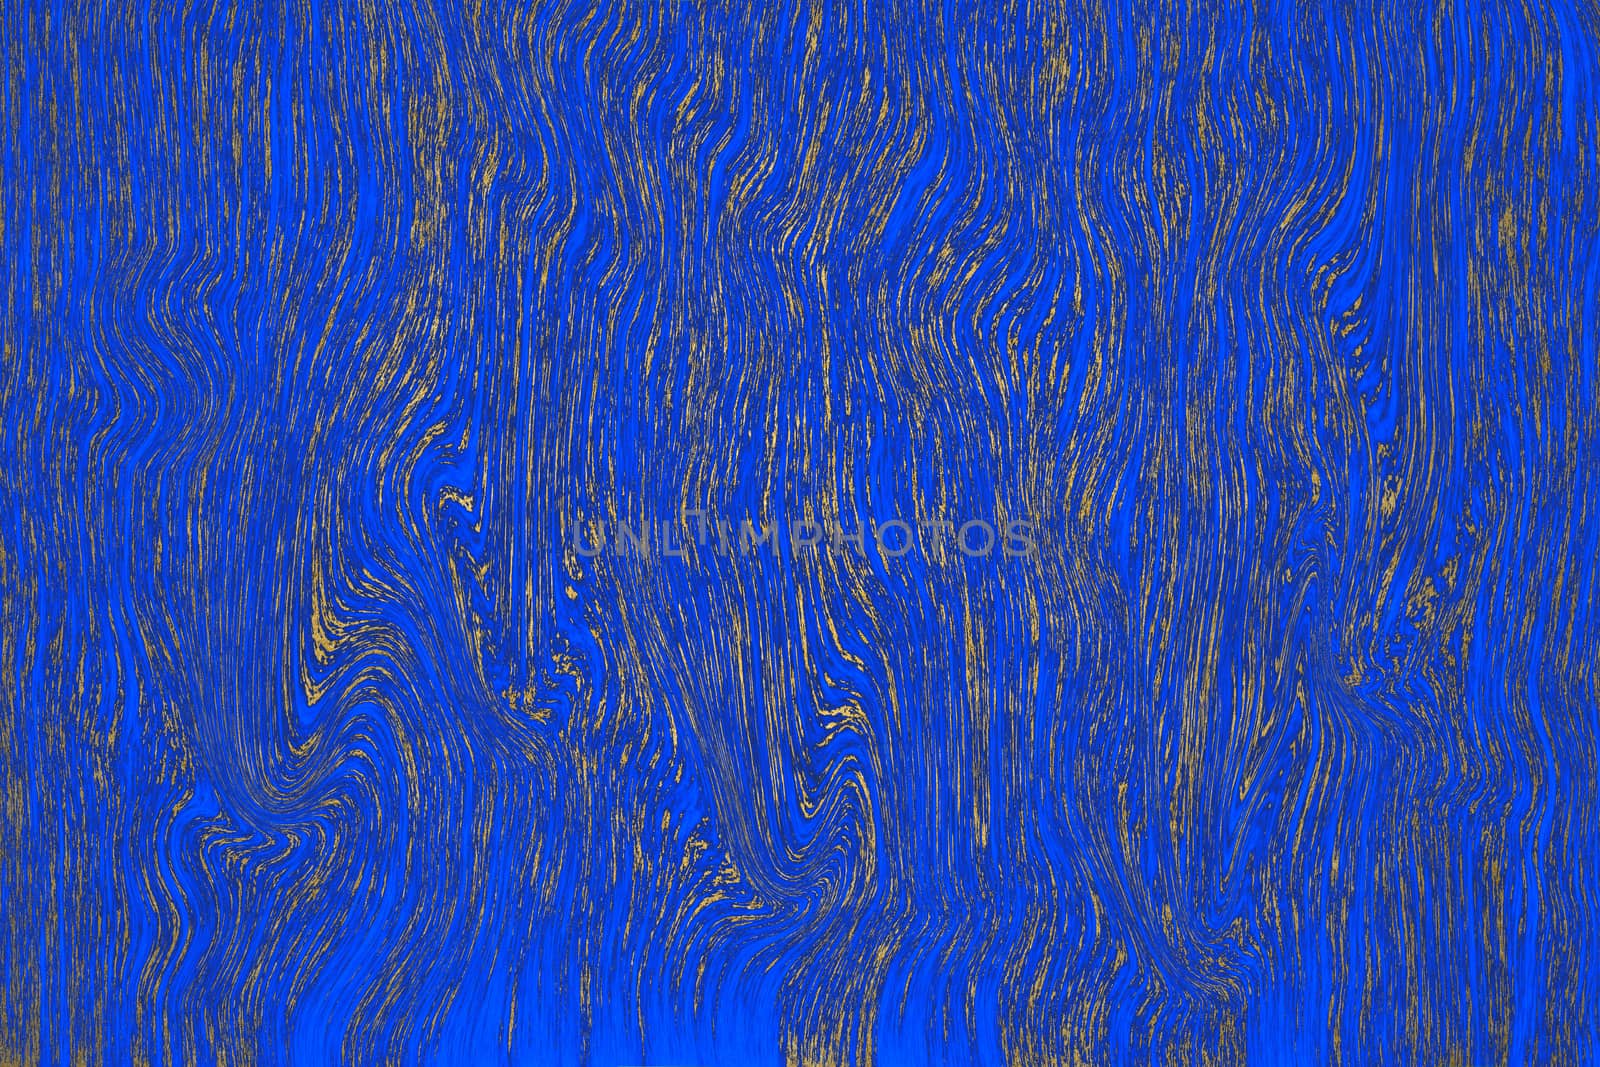 abstract blue and gold line same wood texture surface art interior background